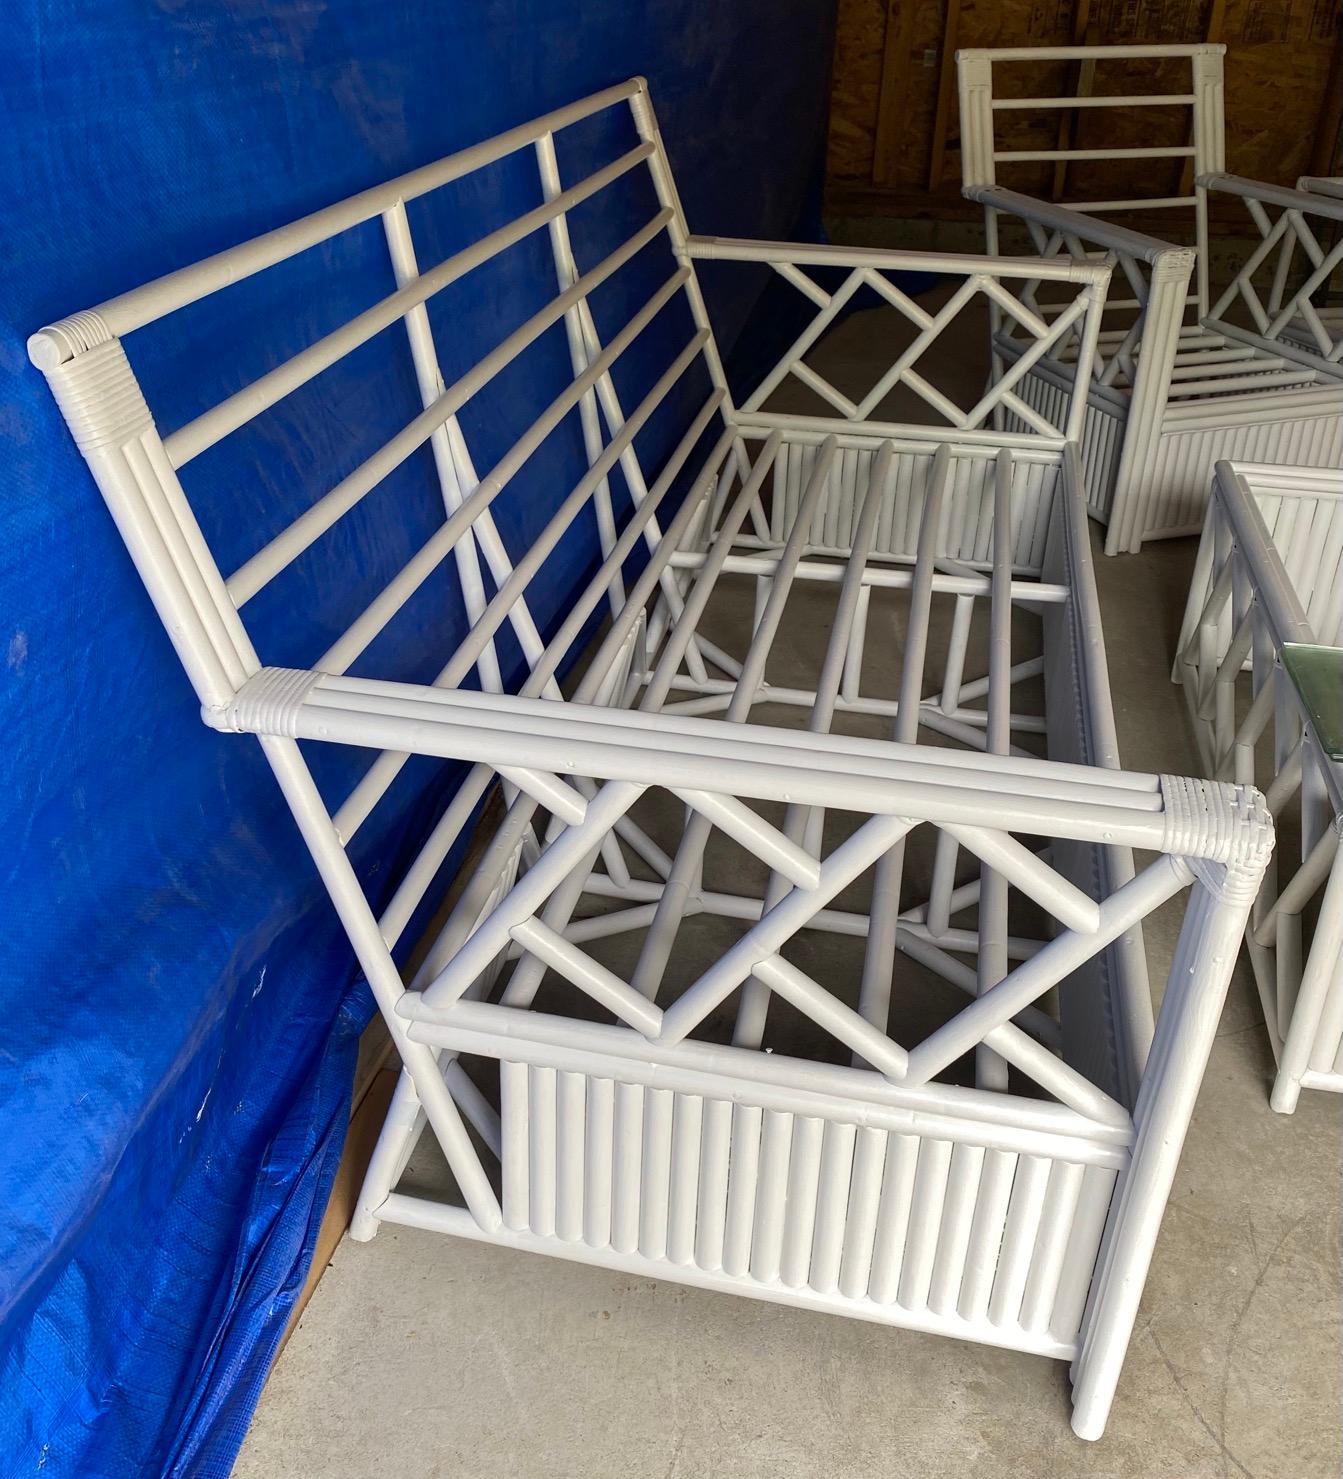 6 Piece Mid-Century Modern Rattan Patio Porch Ensemble In Good Condition For Sale In Sheffield, MA